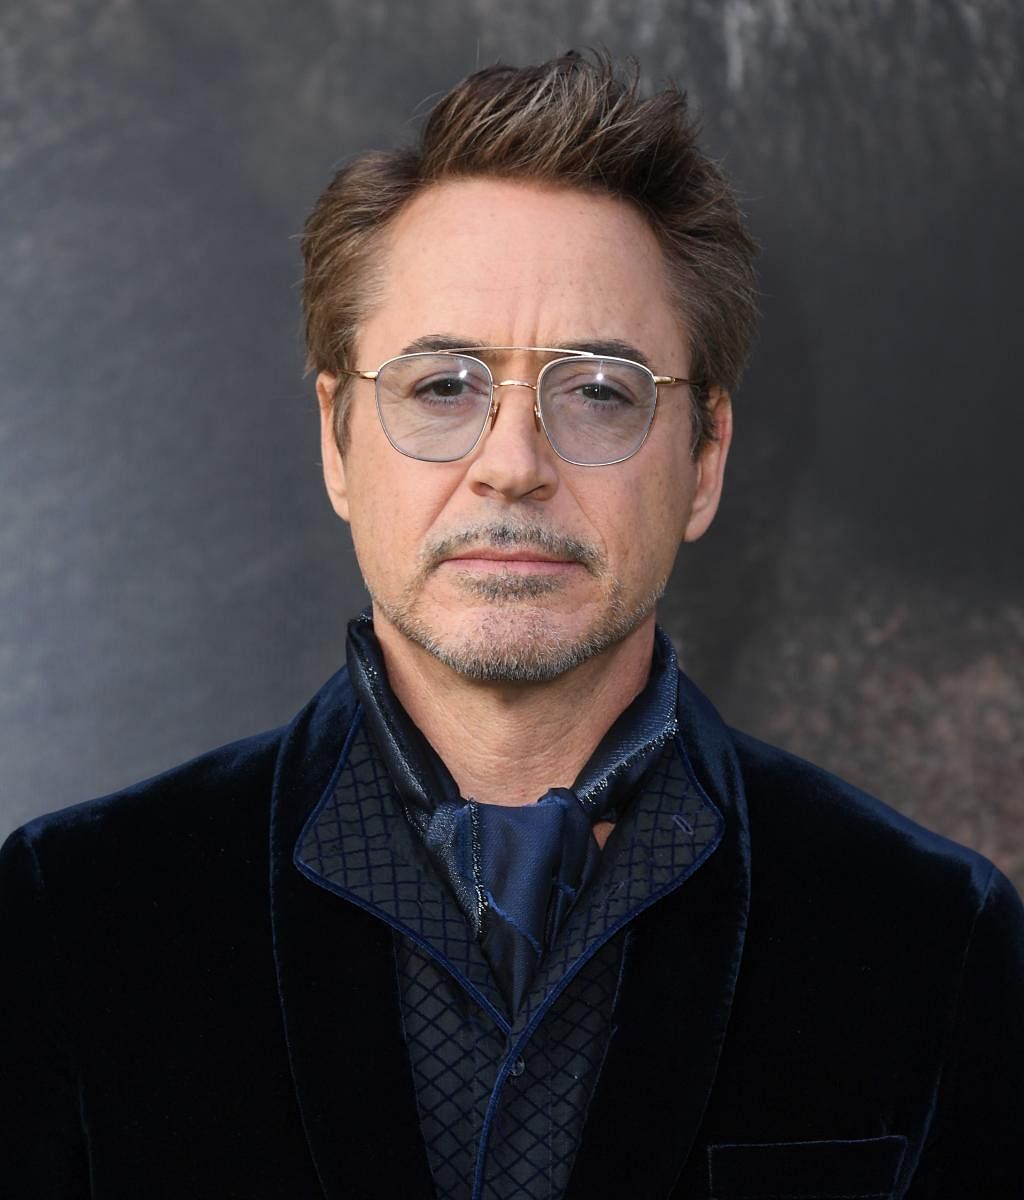 Robert Downey Jr says his journey as Iron Man is over. (Credit: AFP photo)